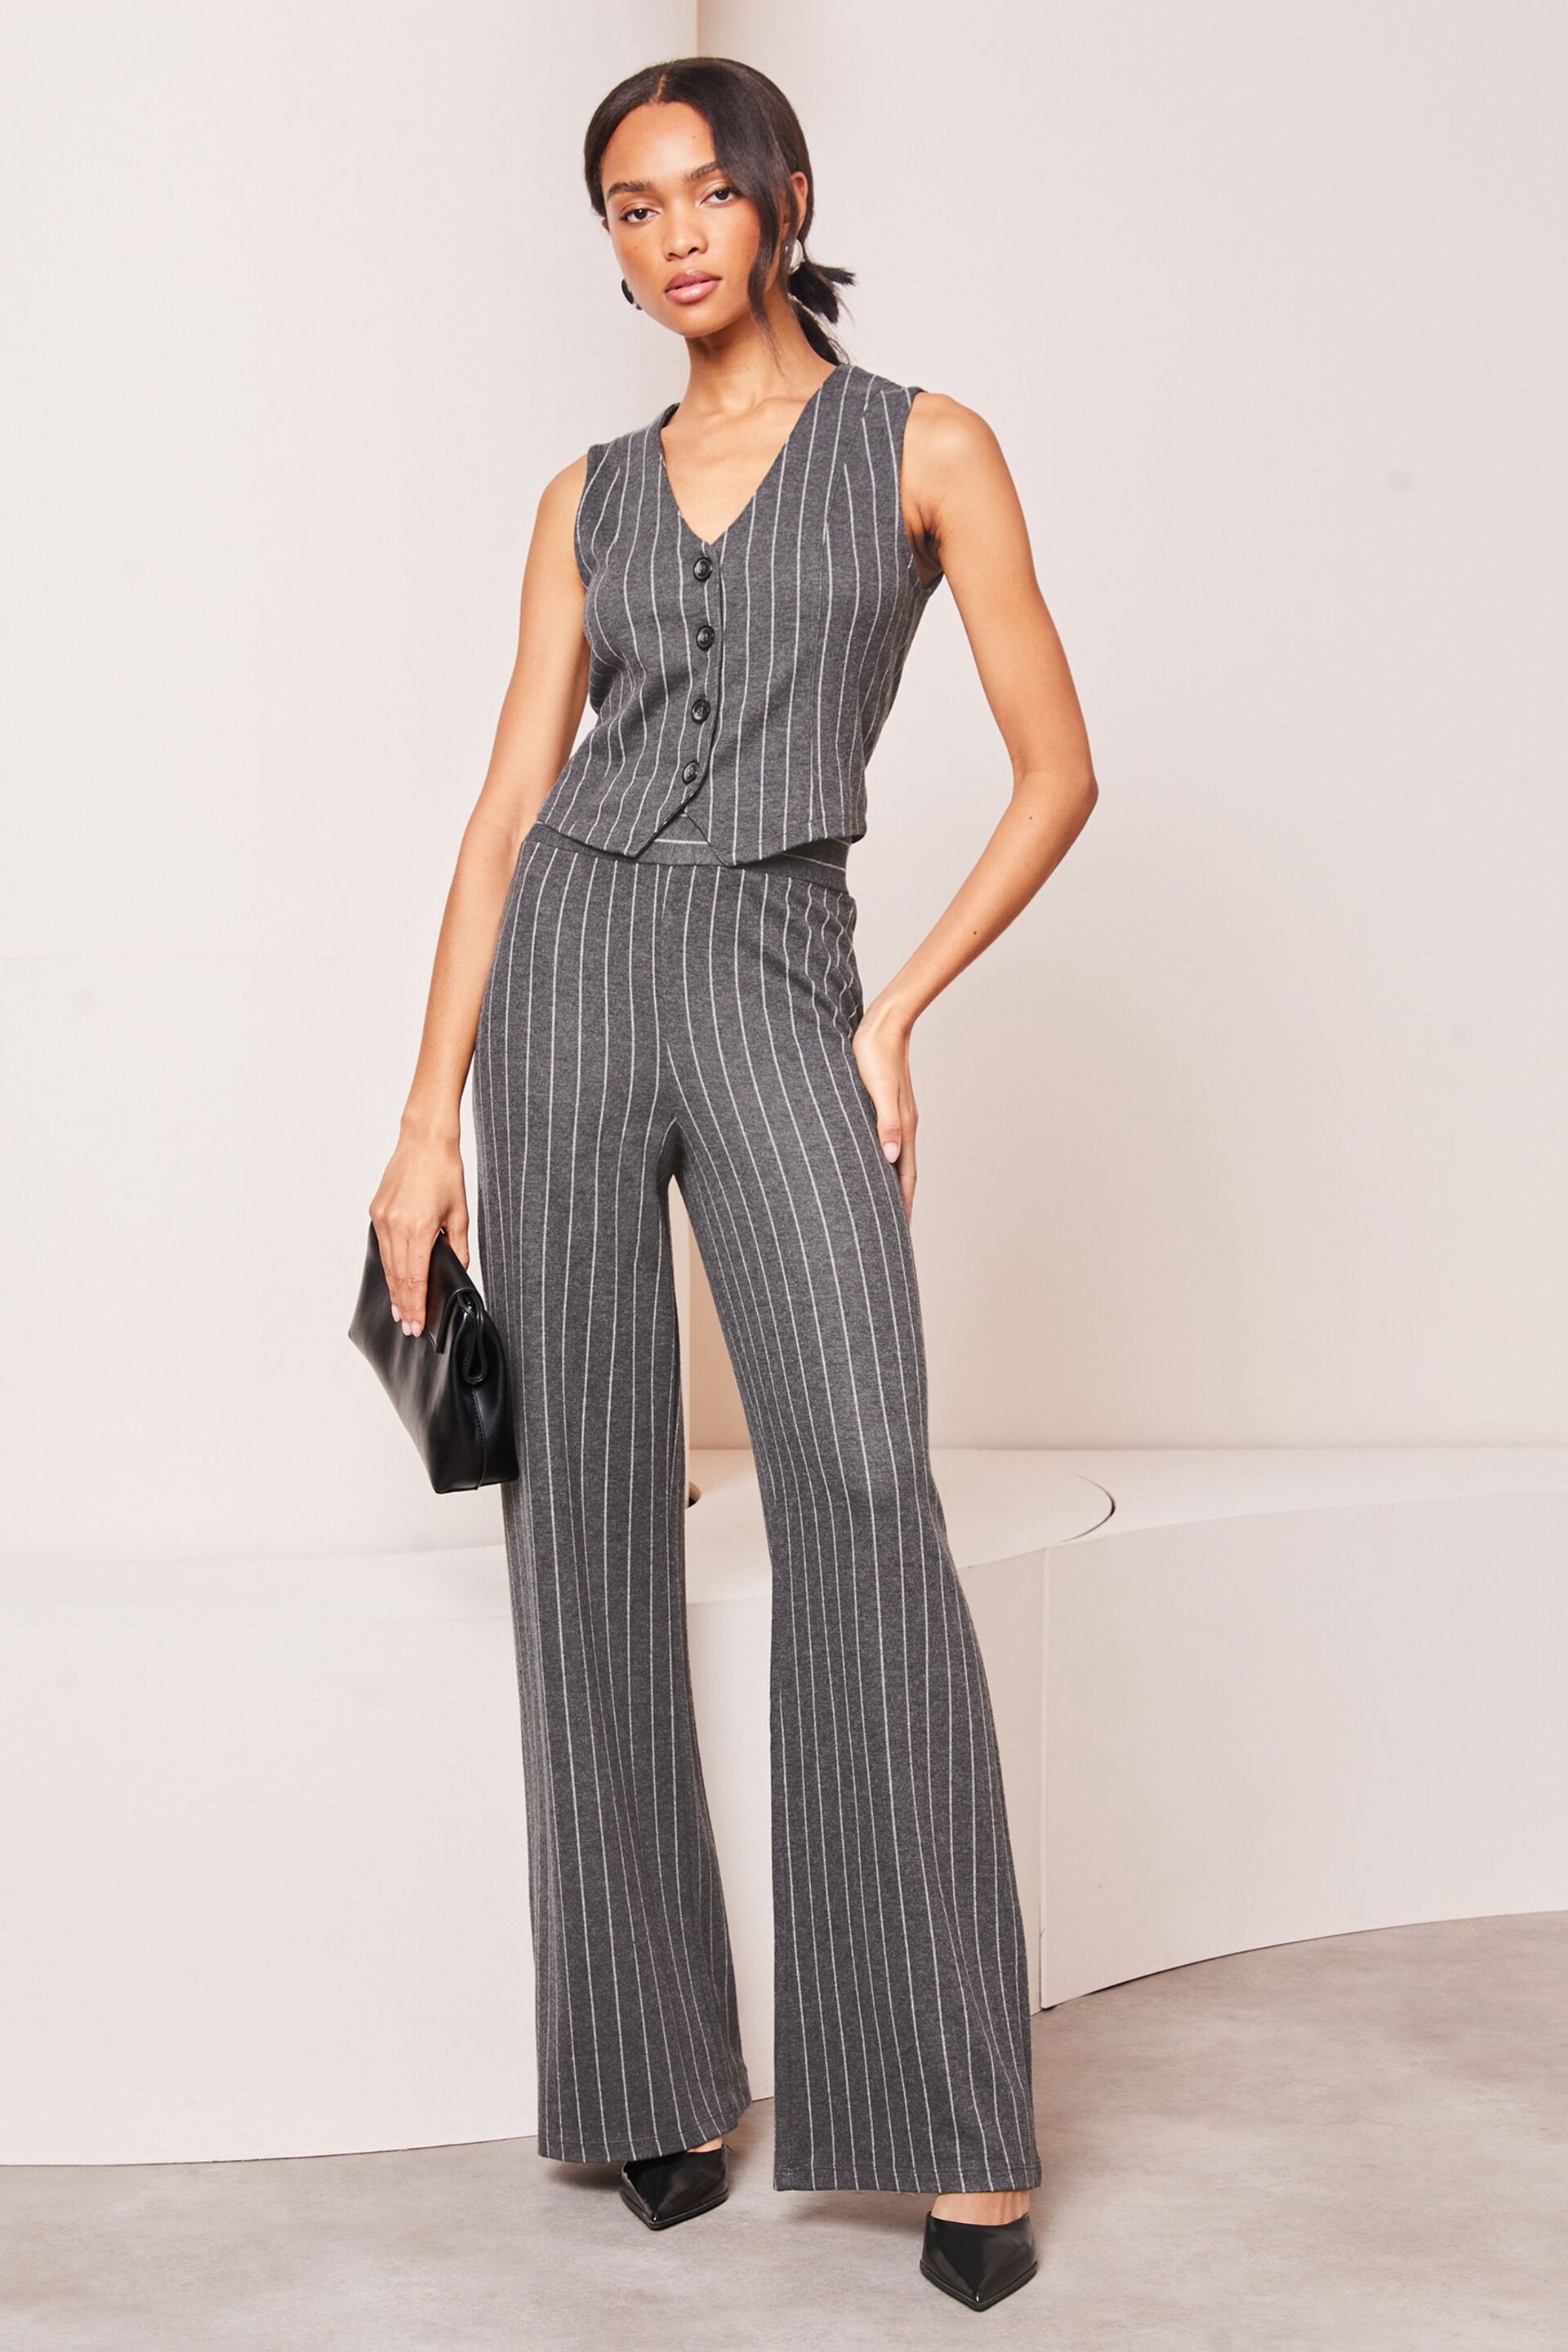 Lipsy Grey Pinstripe High Waist Wide Leg Tailored Trousers - Image 3 of 3